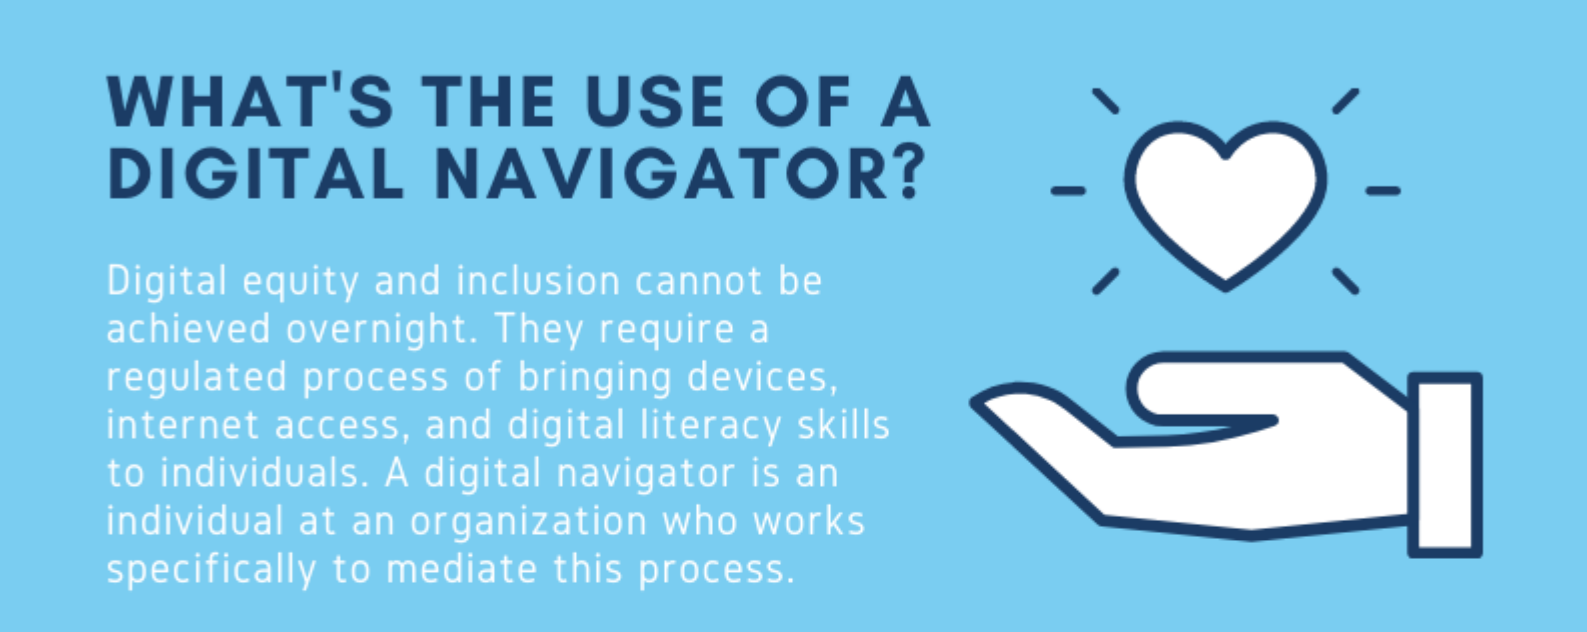 What's the use of a digital navigator?